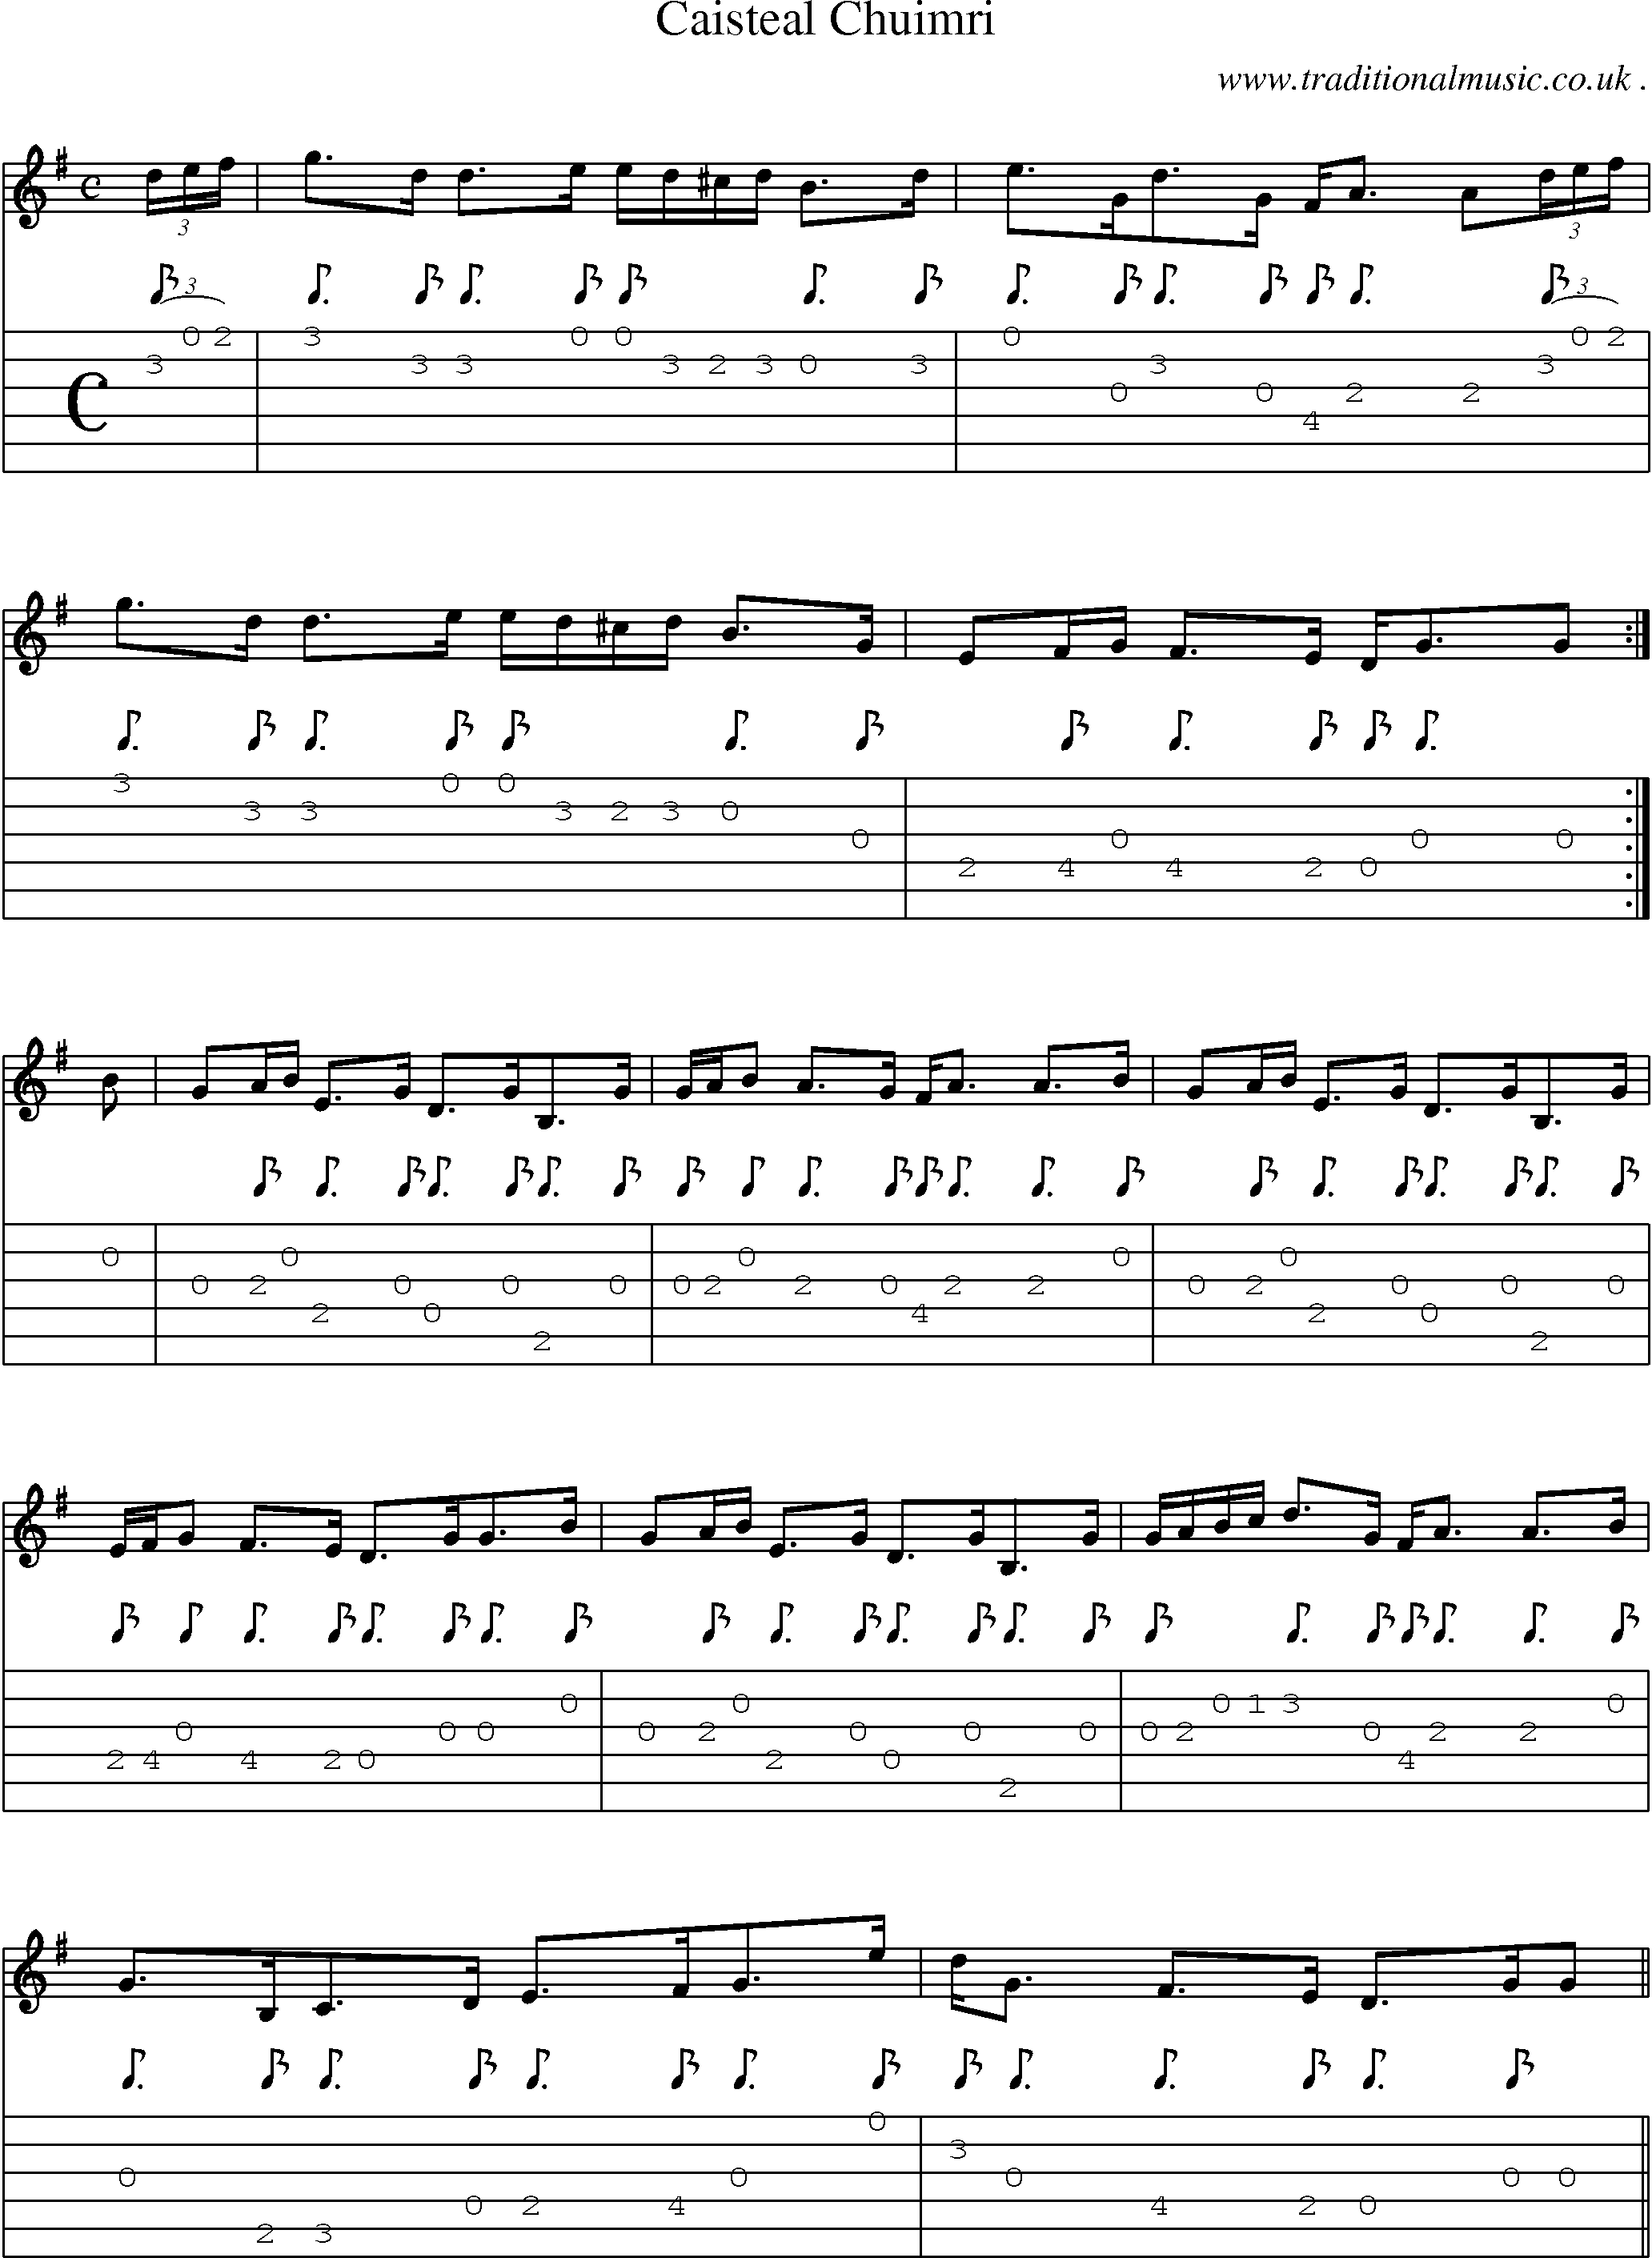 Sheet-music  score, Chords and Guitar Tabs for Caisteal Chuimri